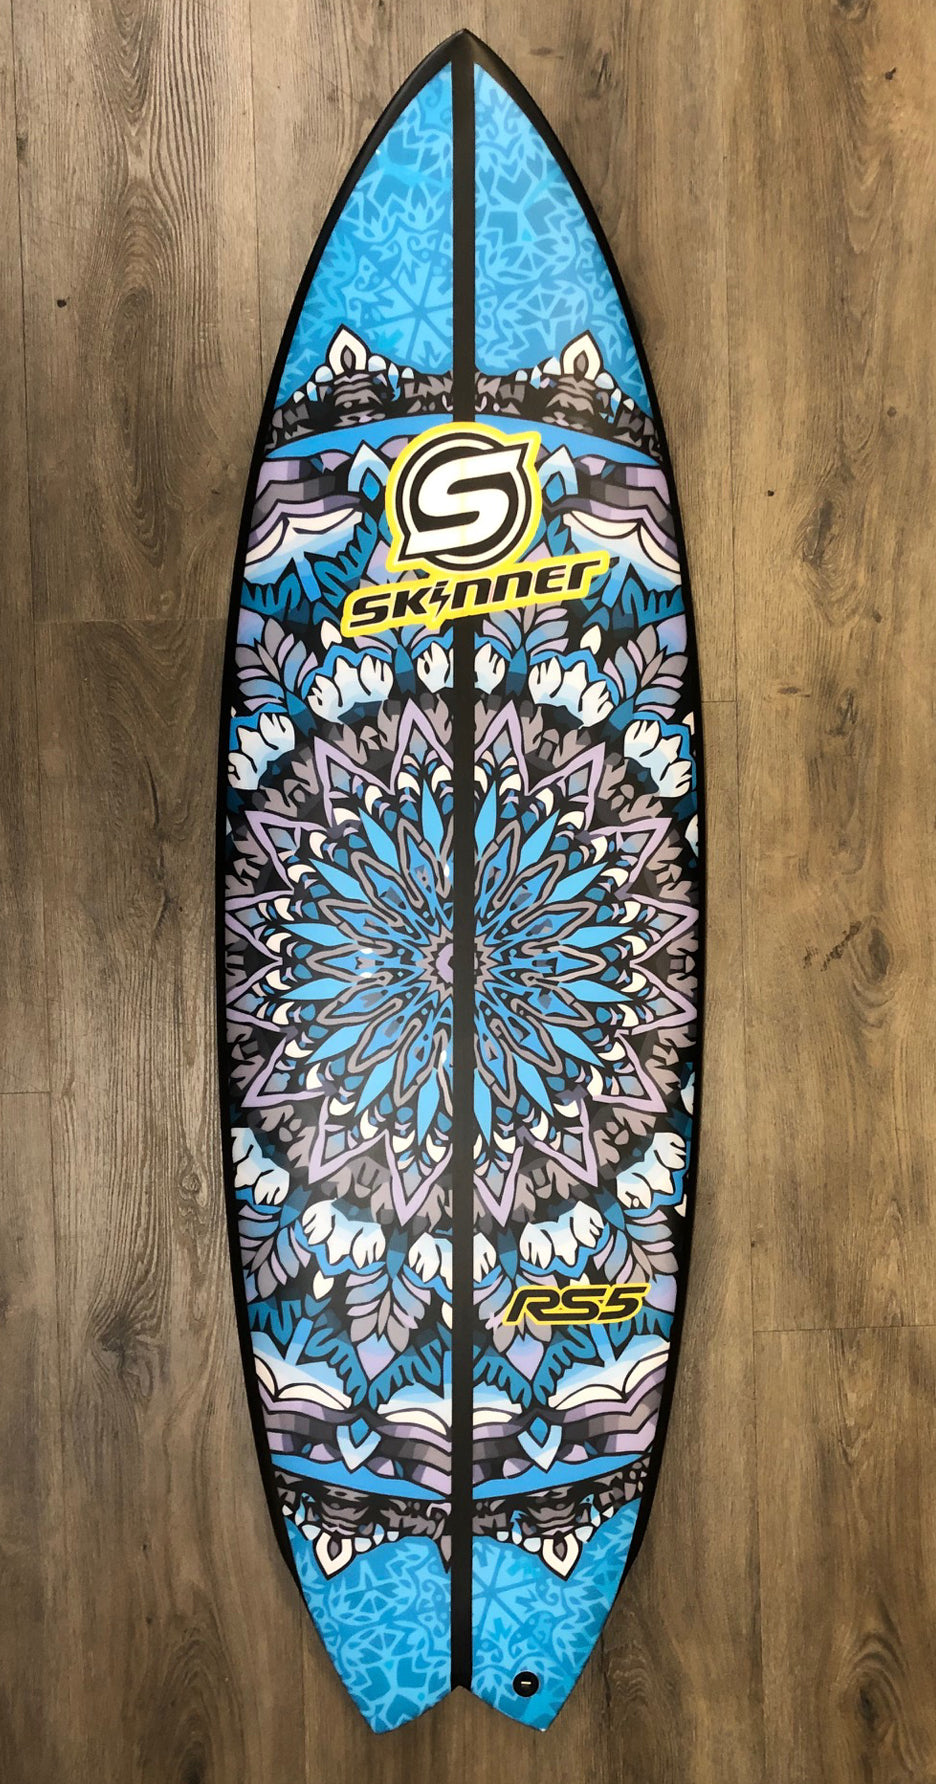 SOLD Skinner Surfboards RS5 Fish 5'6 x 19 7/8" x 30.6L 5 FCS2 Plugs Surfboard